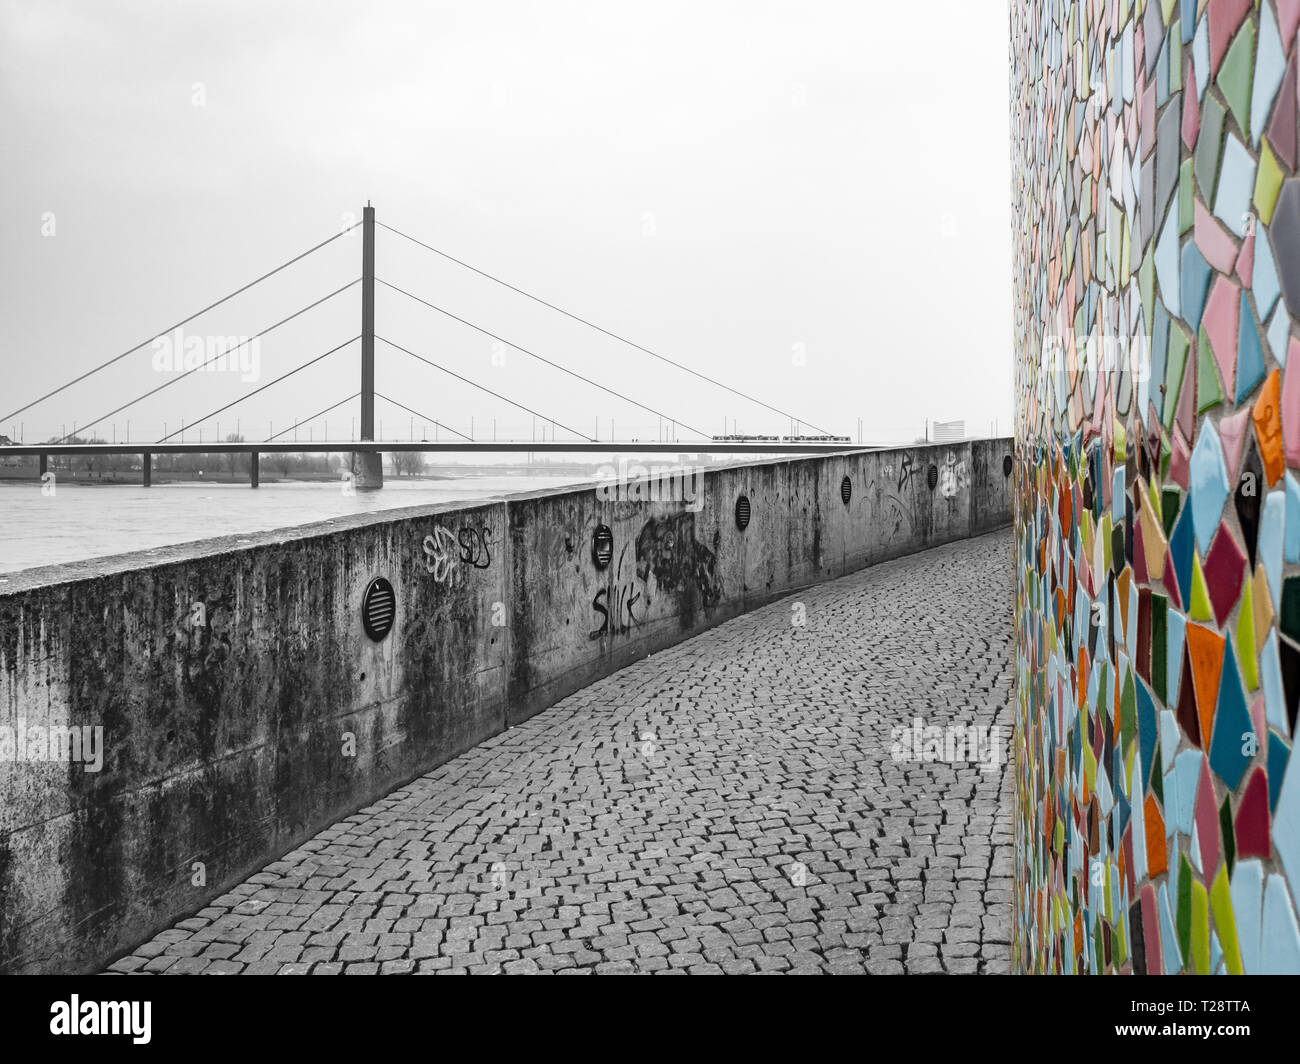 Düsseldorf, Germany, 23 March 2019. Colorful Mosaic agasinst the backdrop of modernist architecture and bridge on the bank of river Rhine. Stock Photo